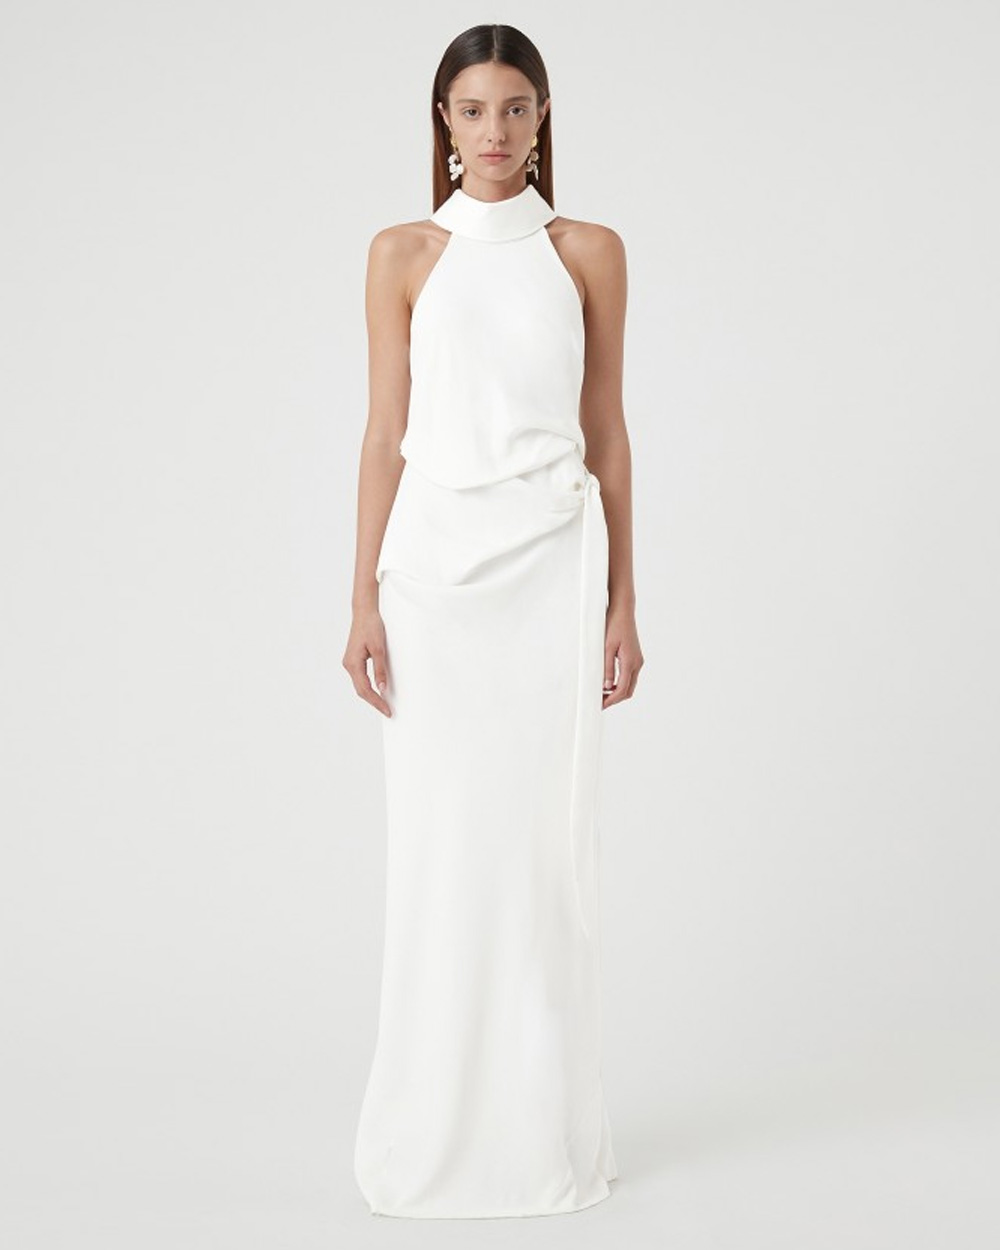 Foxglove dress, $649 AUD from Camilla & Marc-image_1000x1250 | Non-bridal dresses you could 100% get married in